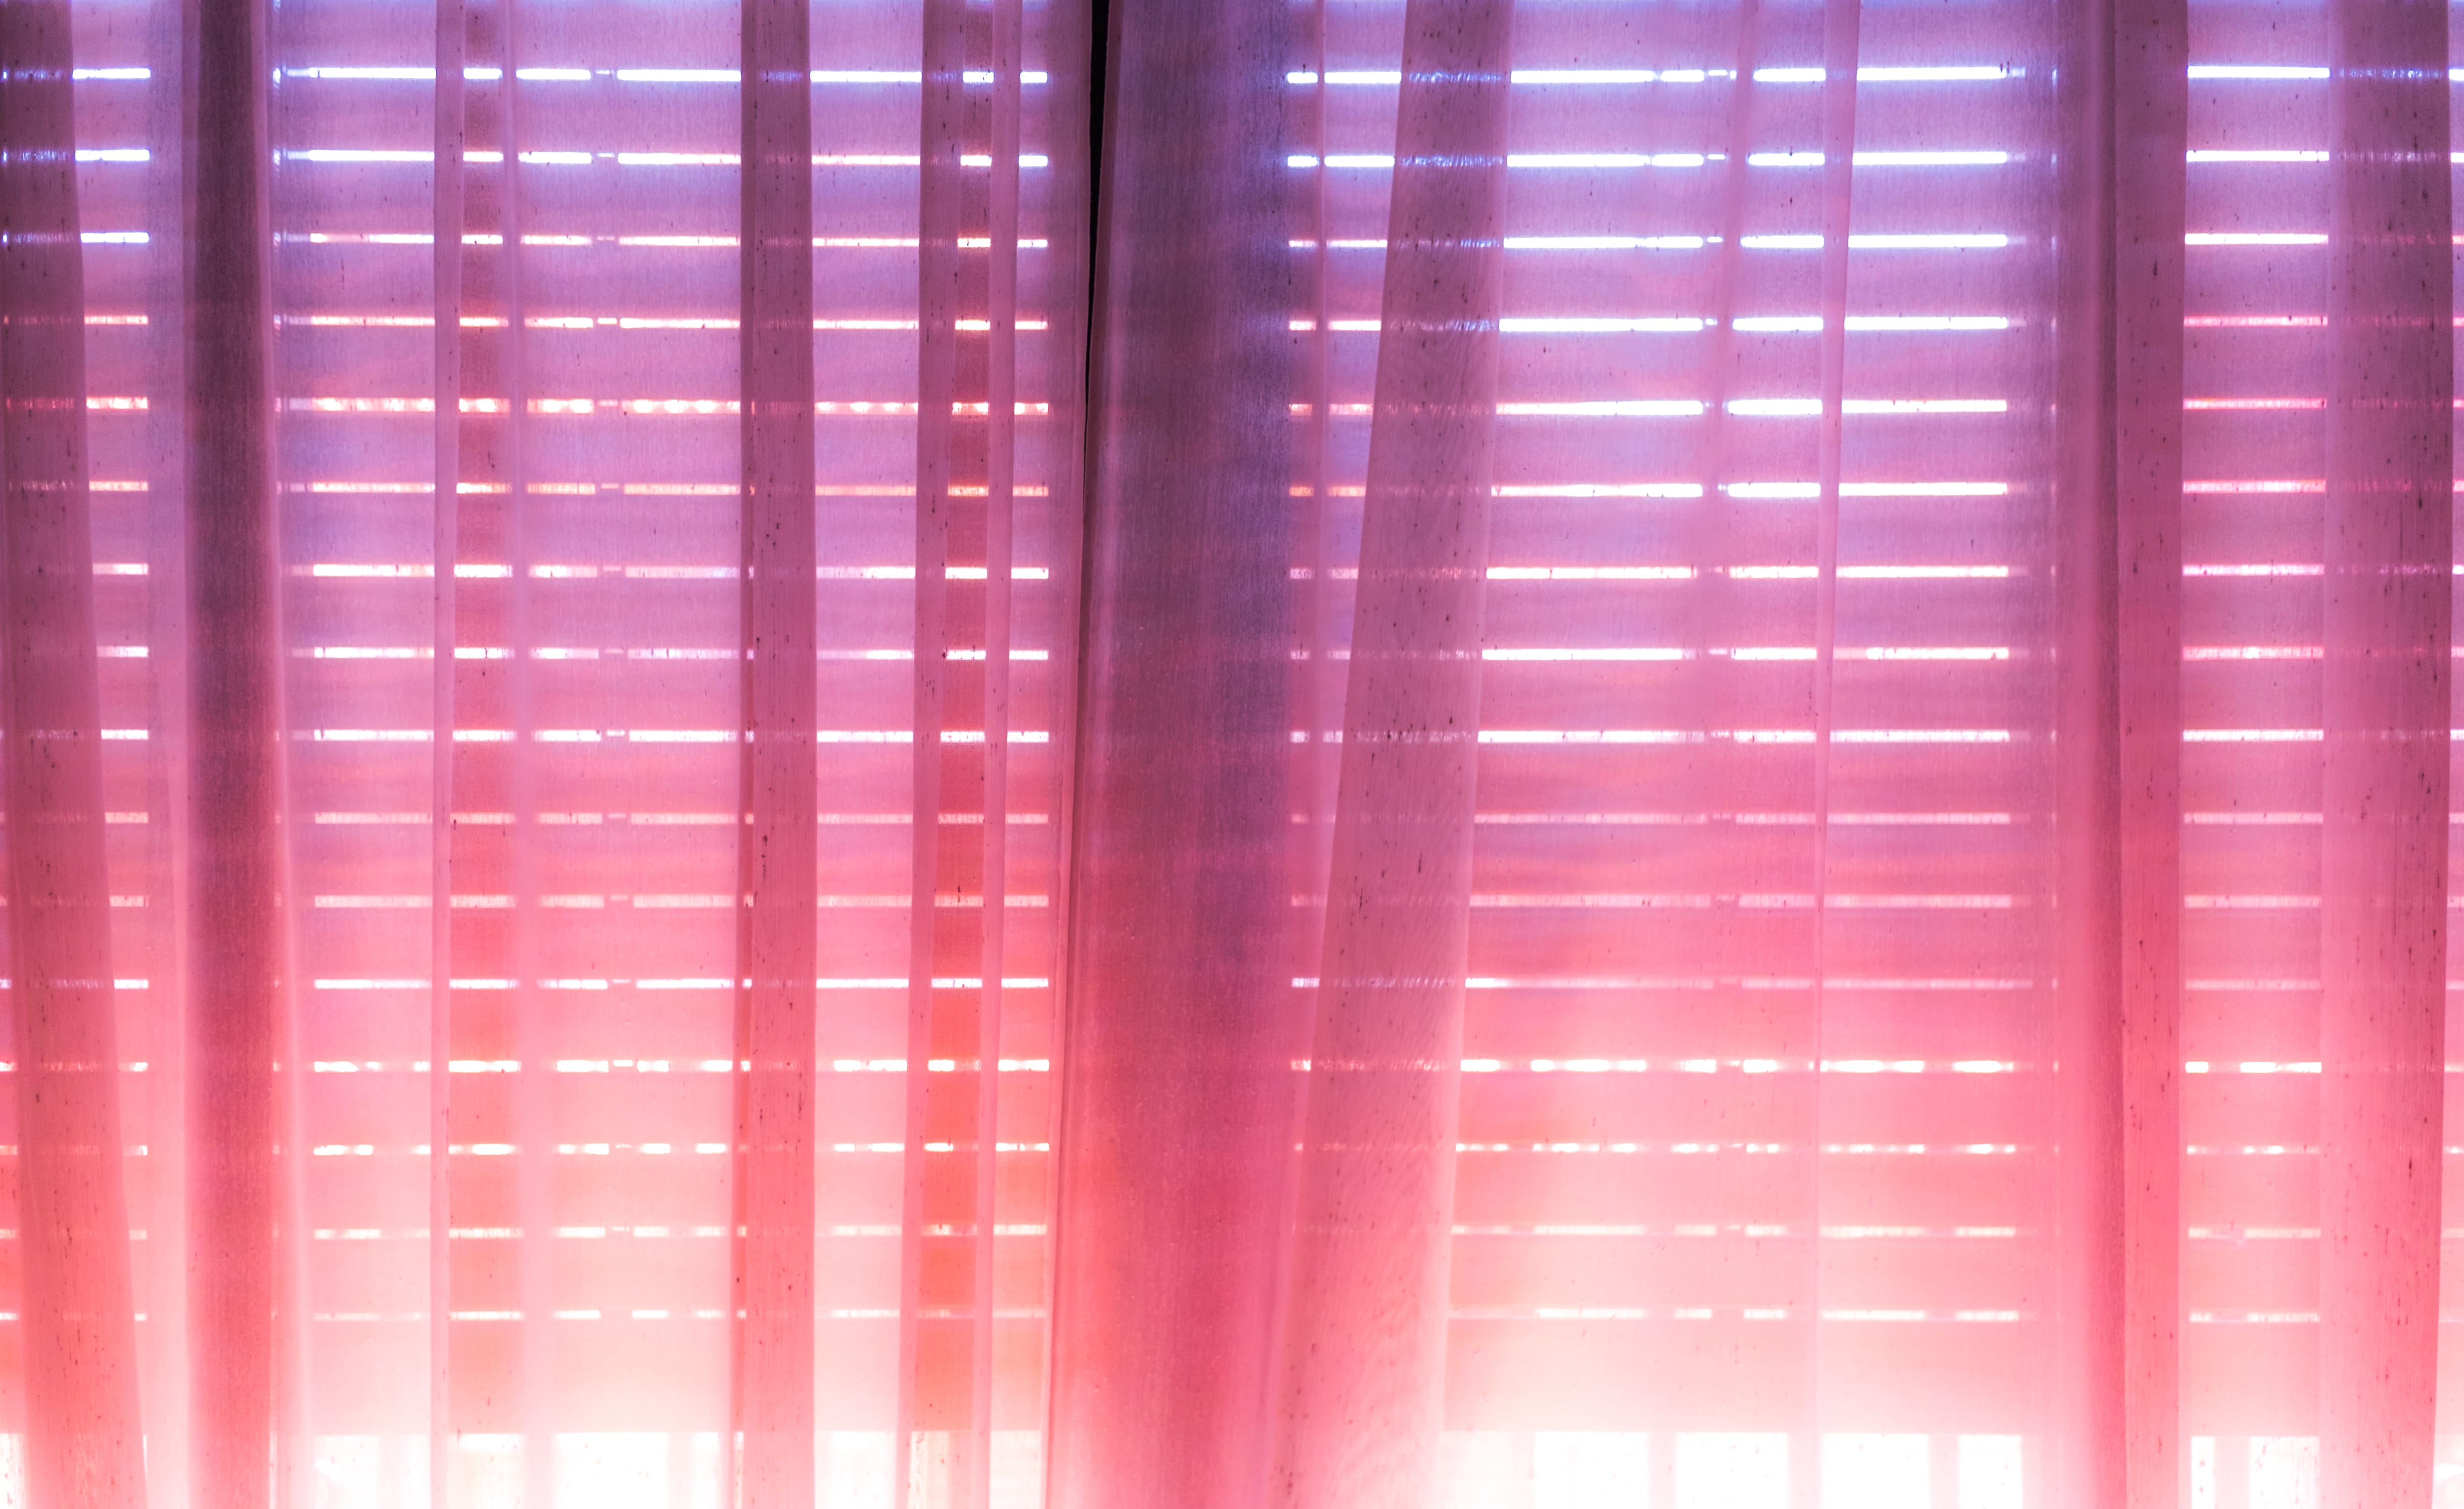 photo of pink and purple ombre curtain, Shadows, curtains, blinds